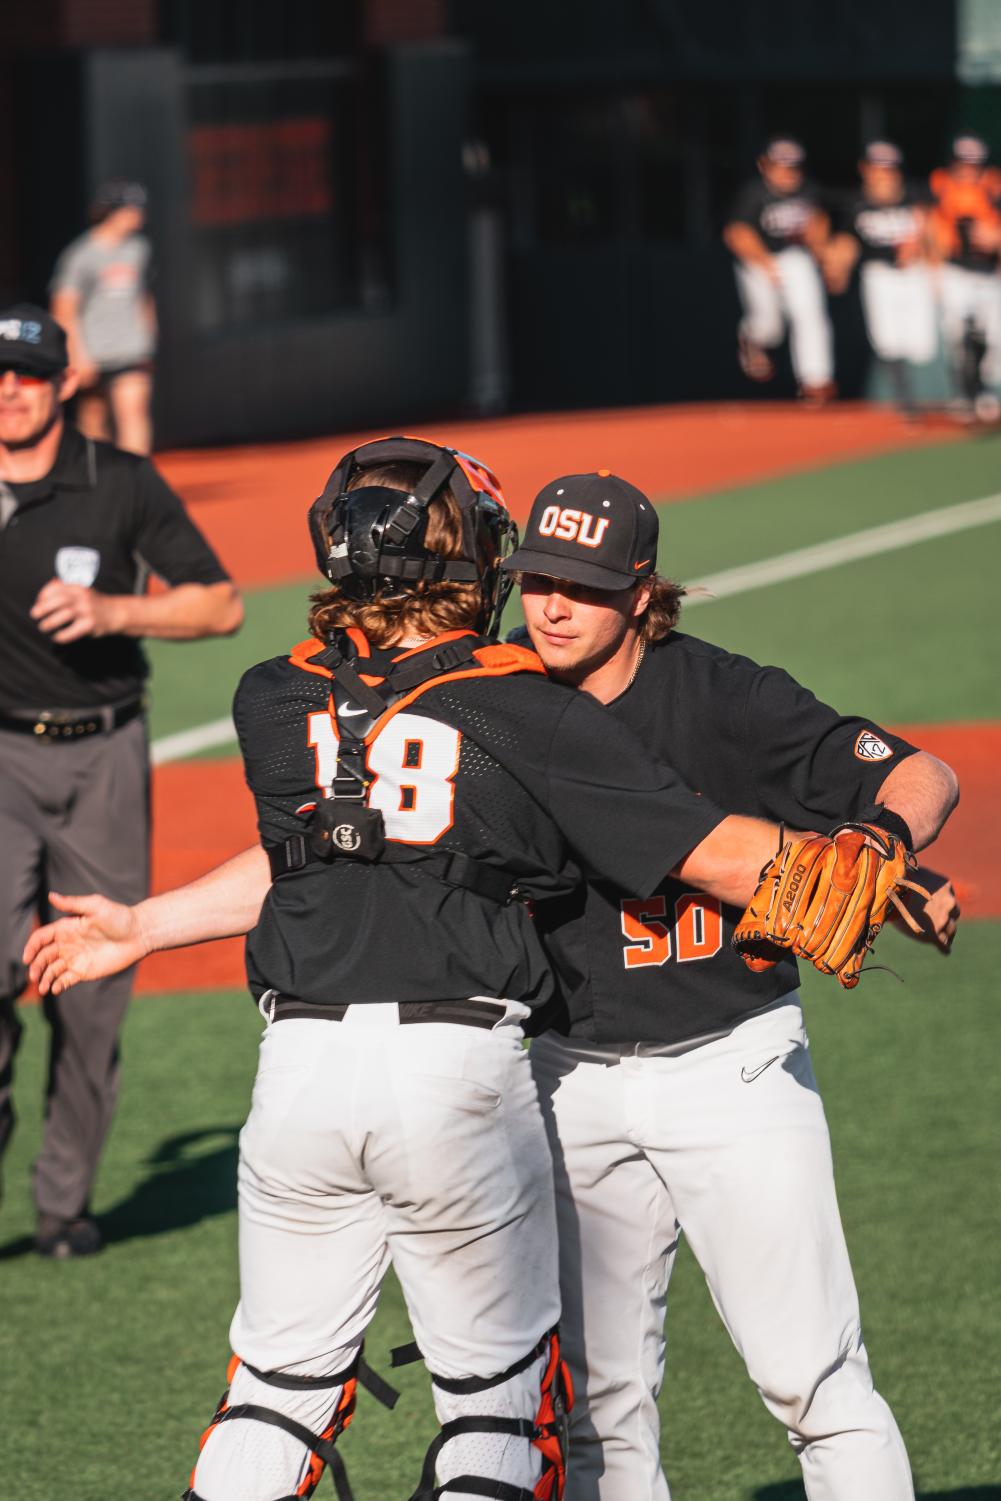 Ryan Brown #50 (right) hugs his catcher Wilson Weber #18 after the victory against the Arizona Wildcats at Goss Stadium in Corvallis on April 30. Brown was drafted by the Oakland Athletics in the 16th round of the 2023 MLB Draft. 